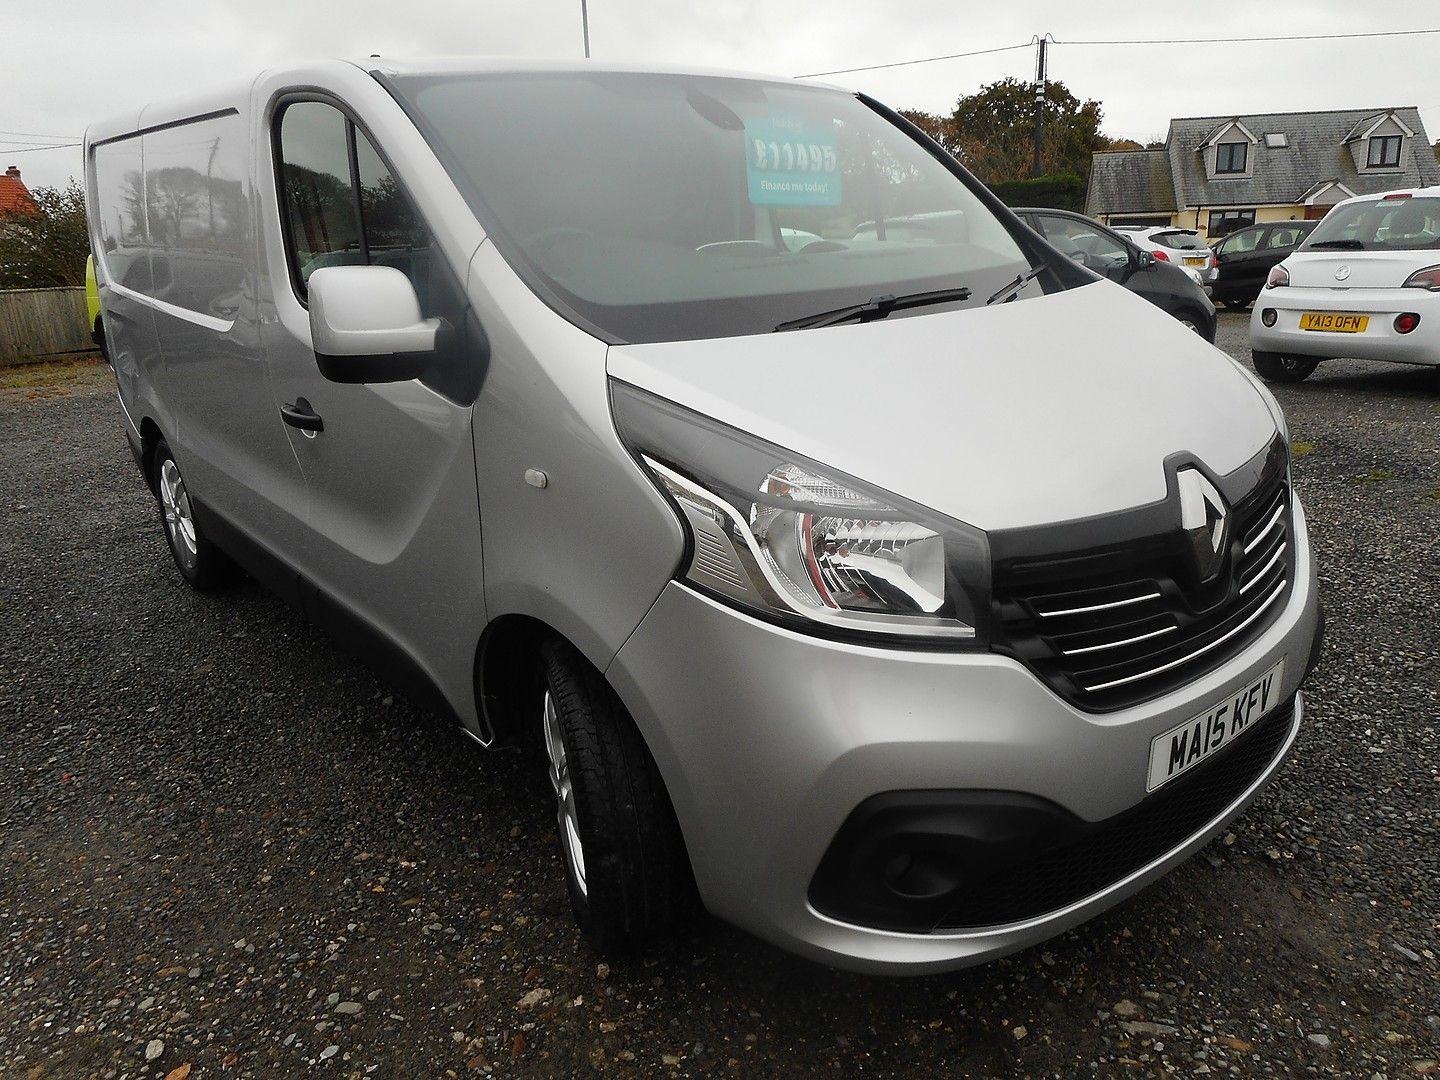 RENAULT Trafic Sport SL27 dCi 115 (2015) - Picture 13